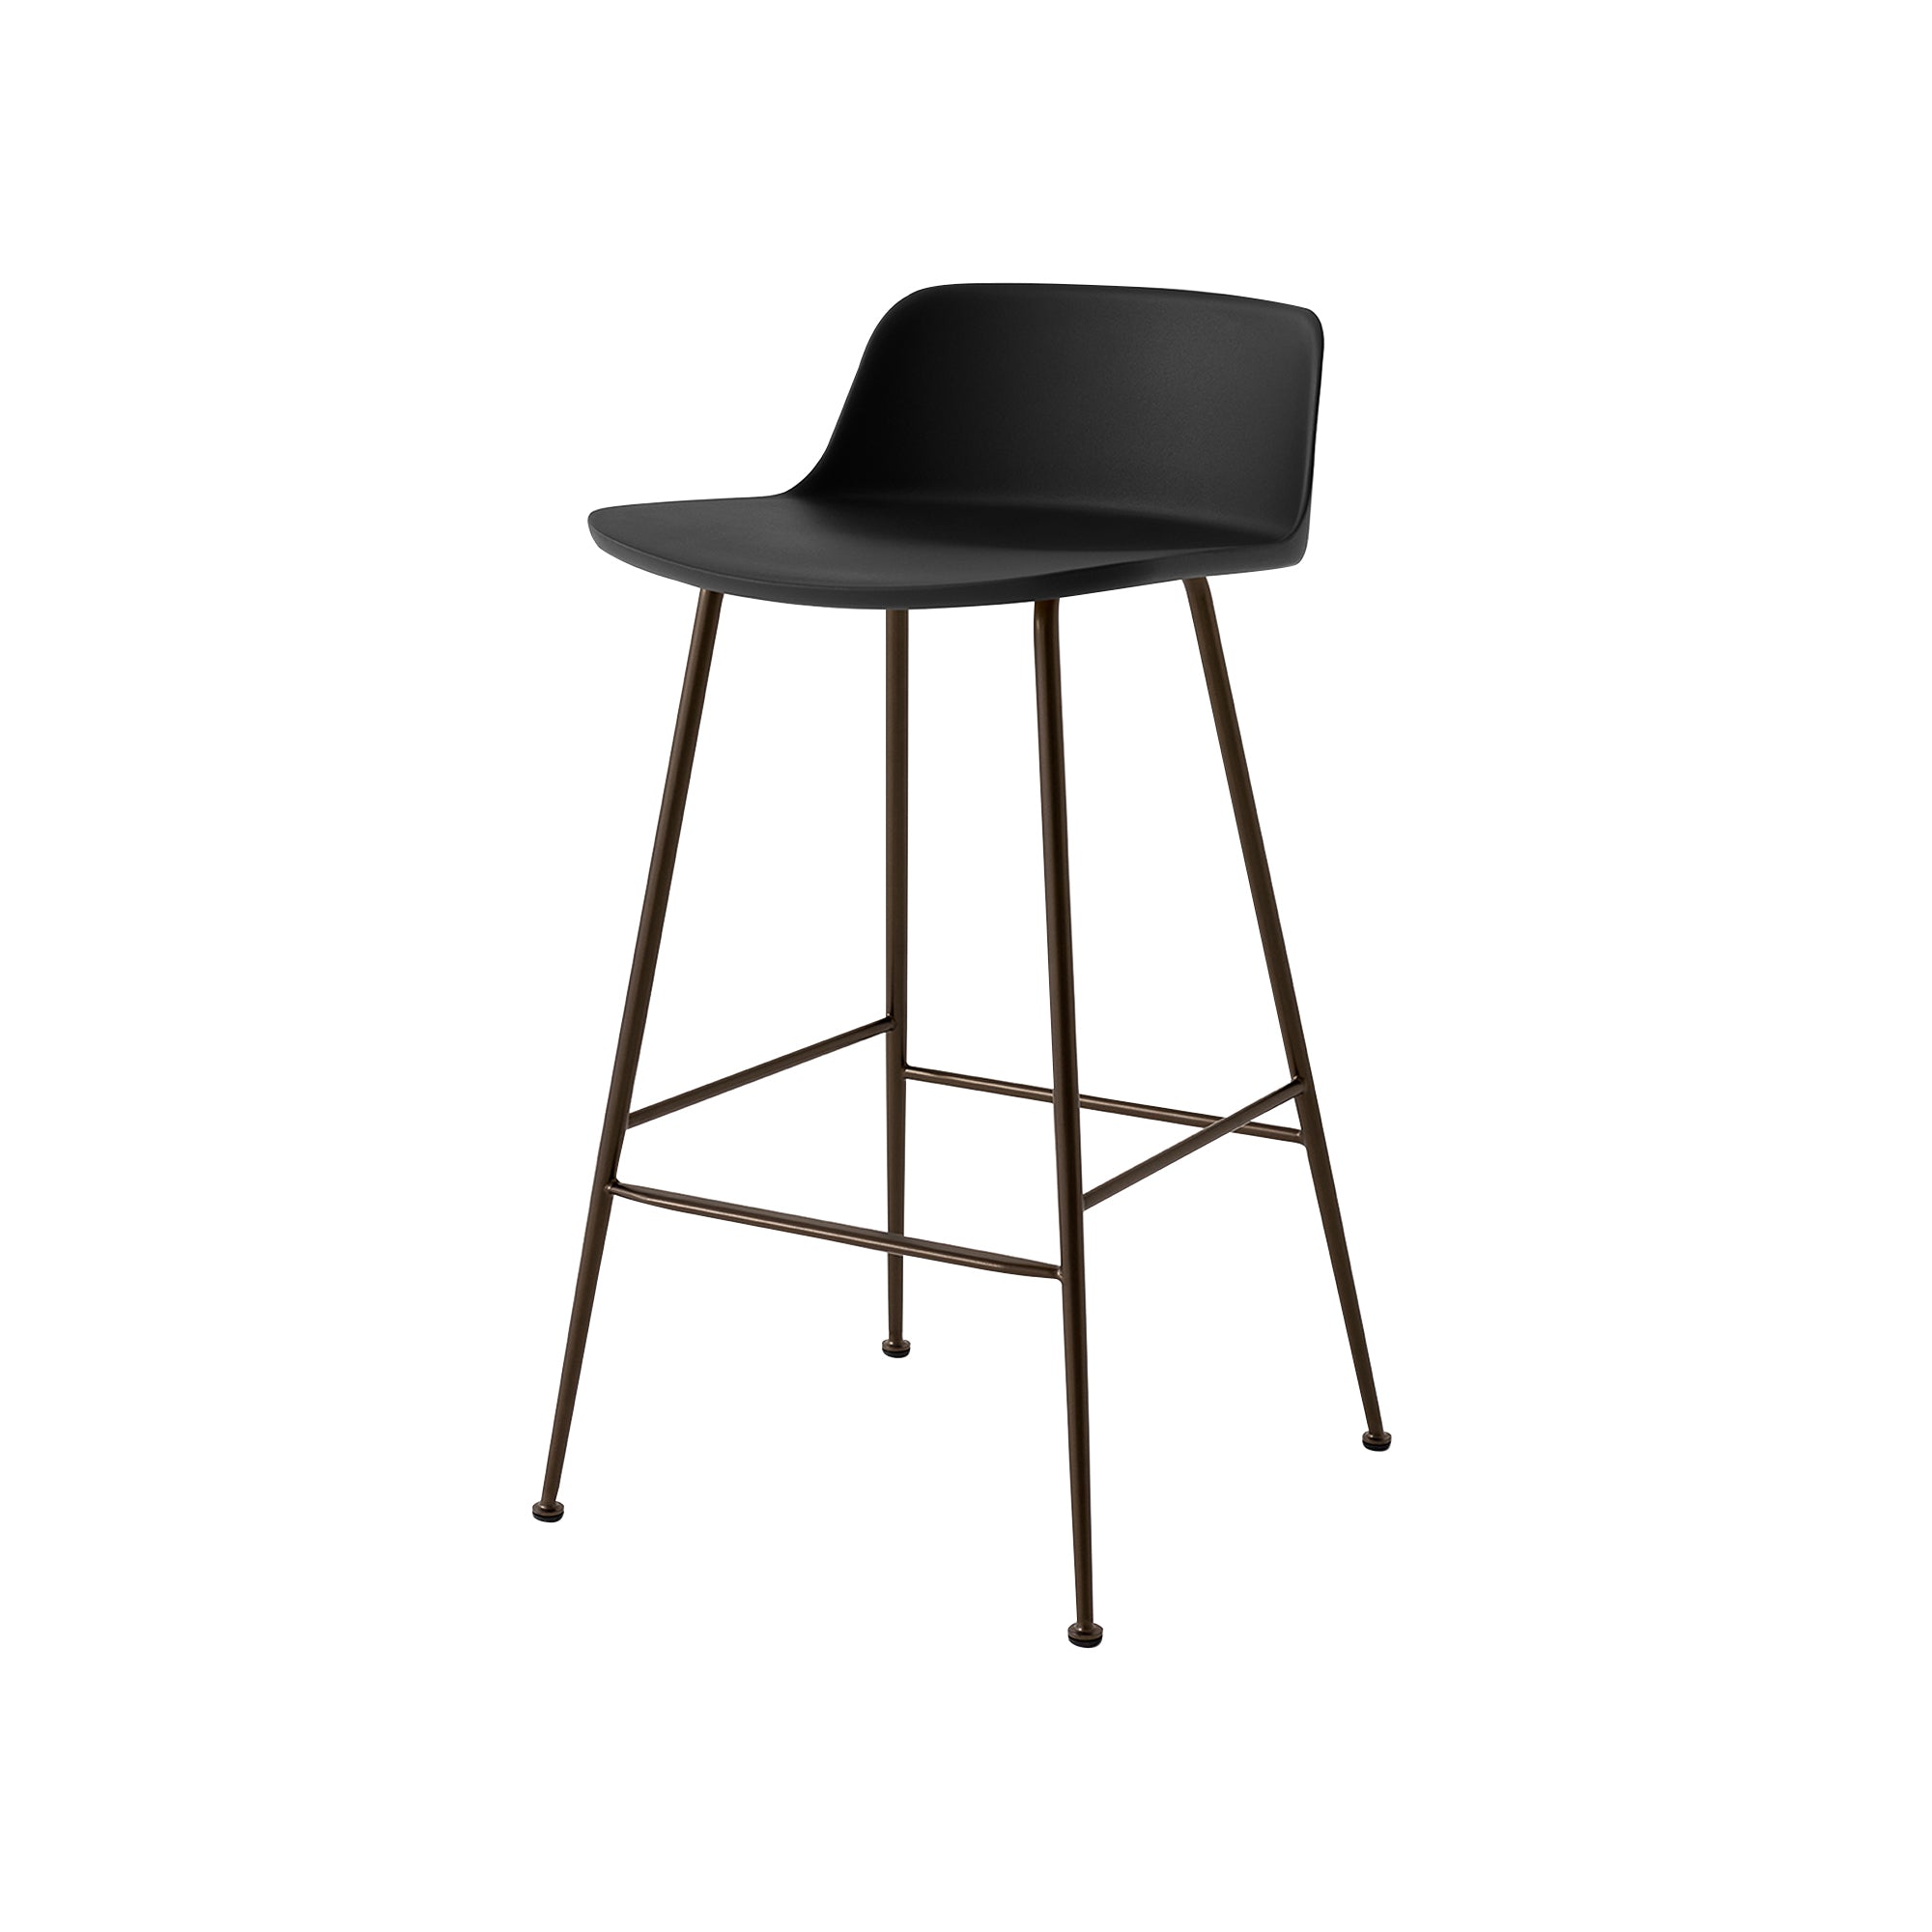 Rely Bar + Counter Lowback Stool: HW81 + HW86 + Counter (HW81) + Black + Bronzed